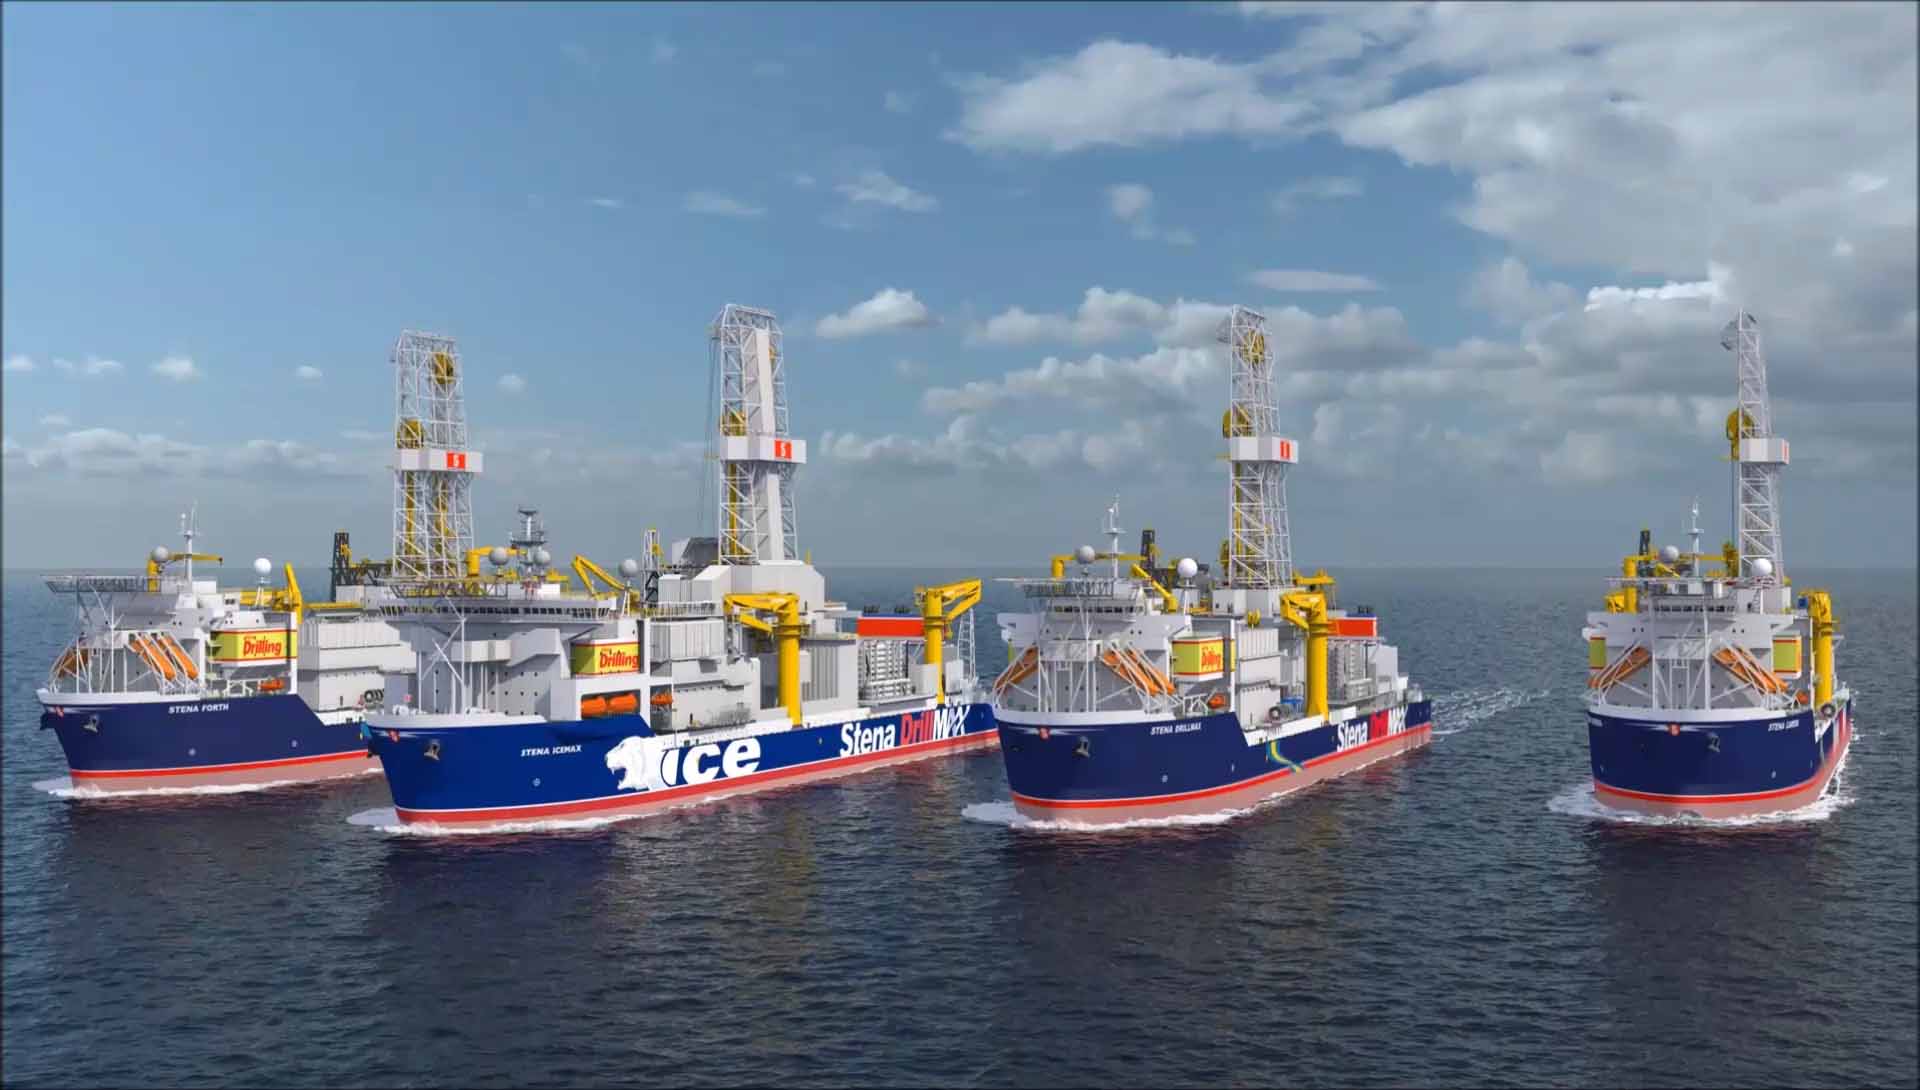 Stena Drilling received decommissioning work from Israel